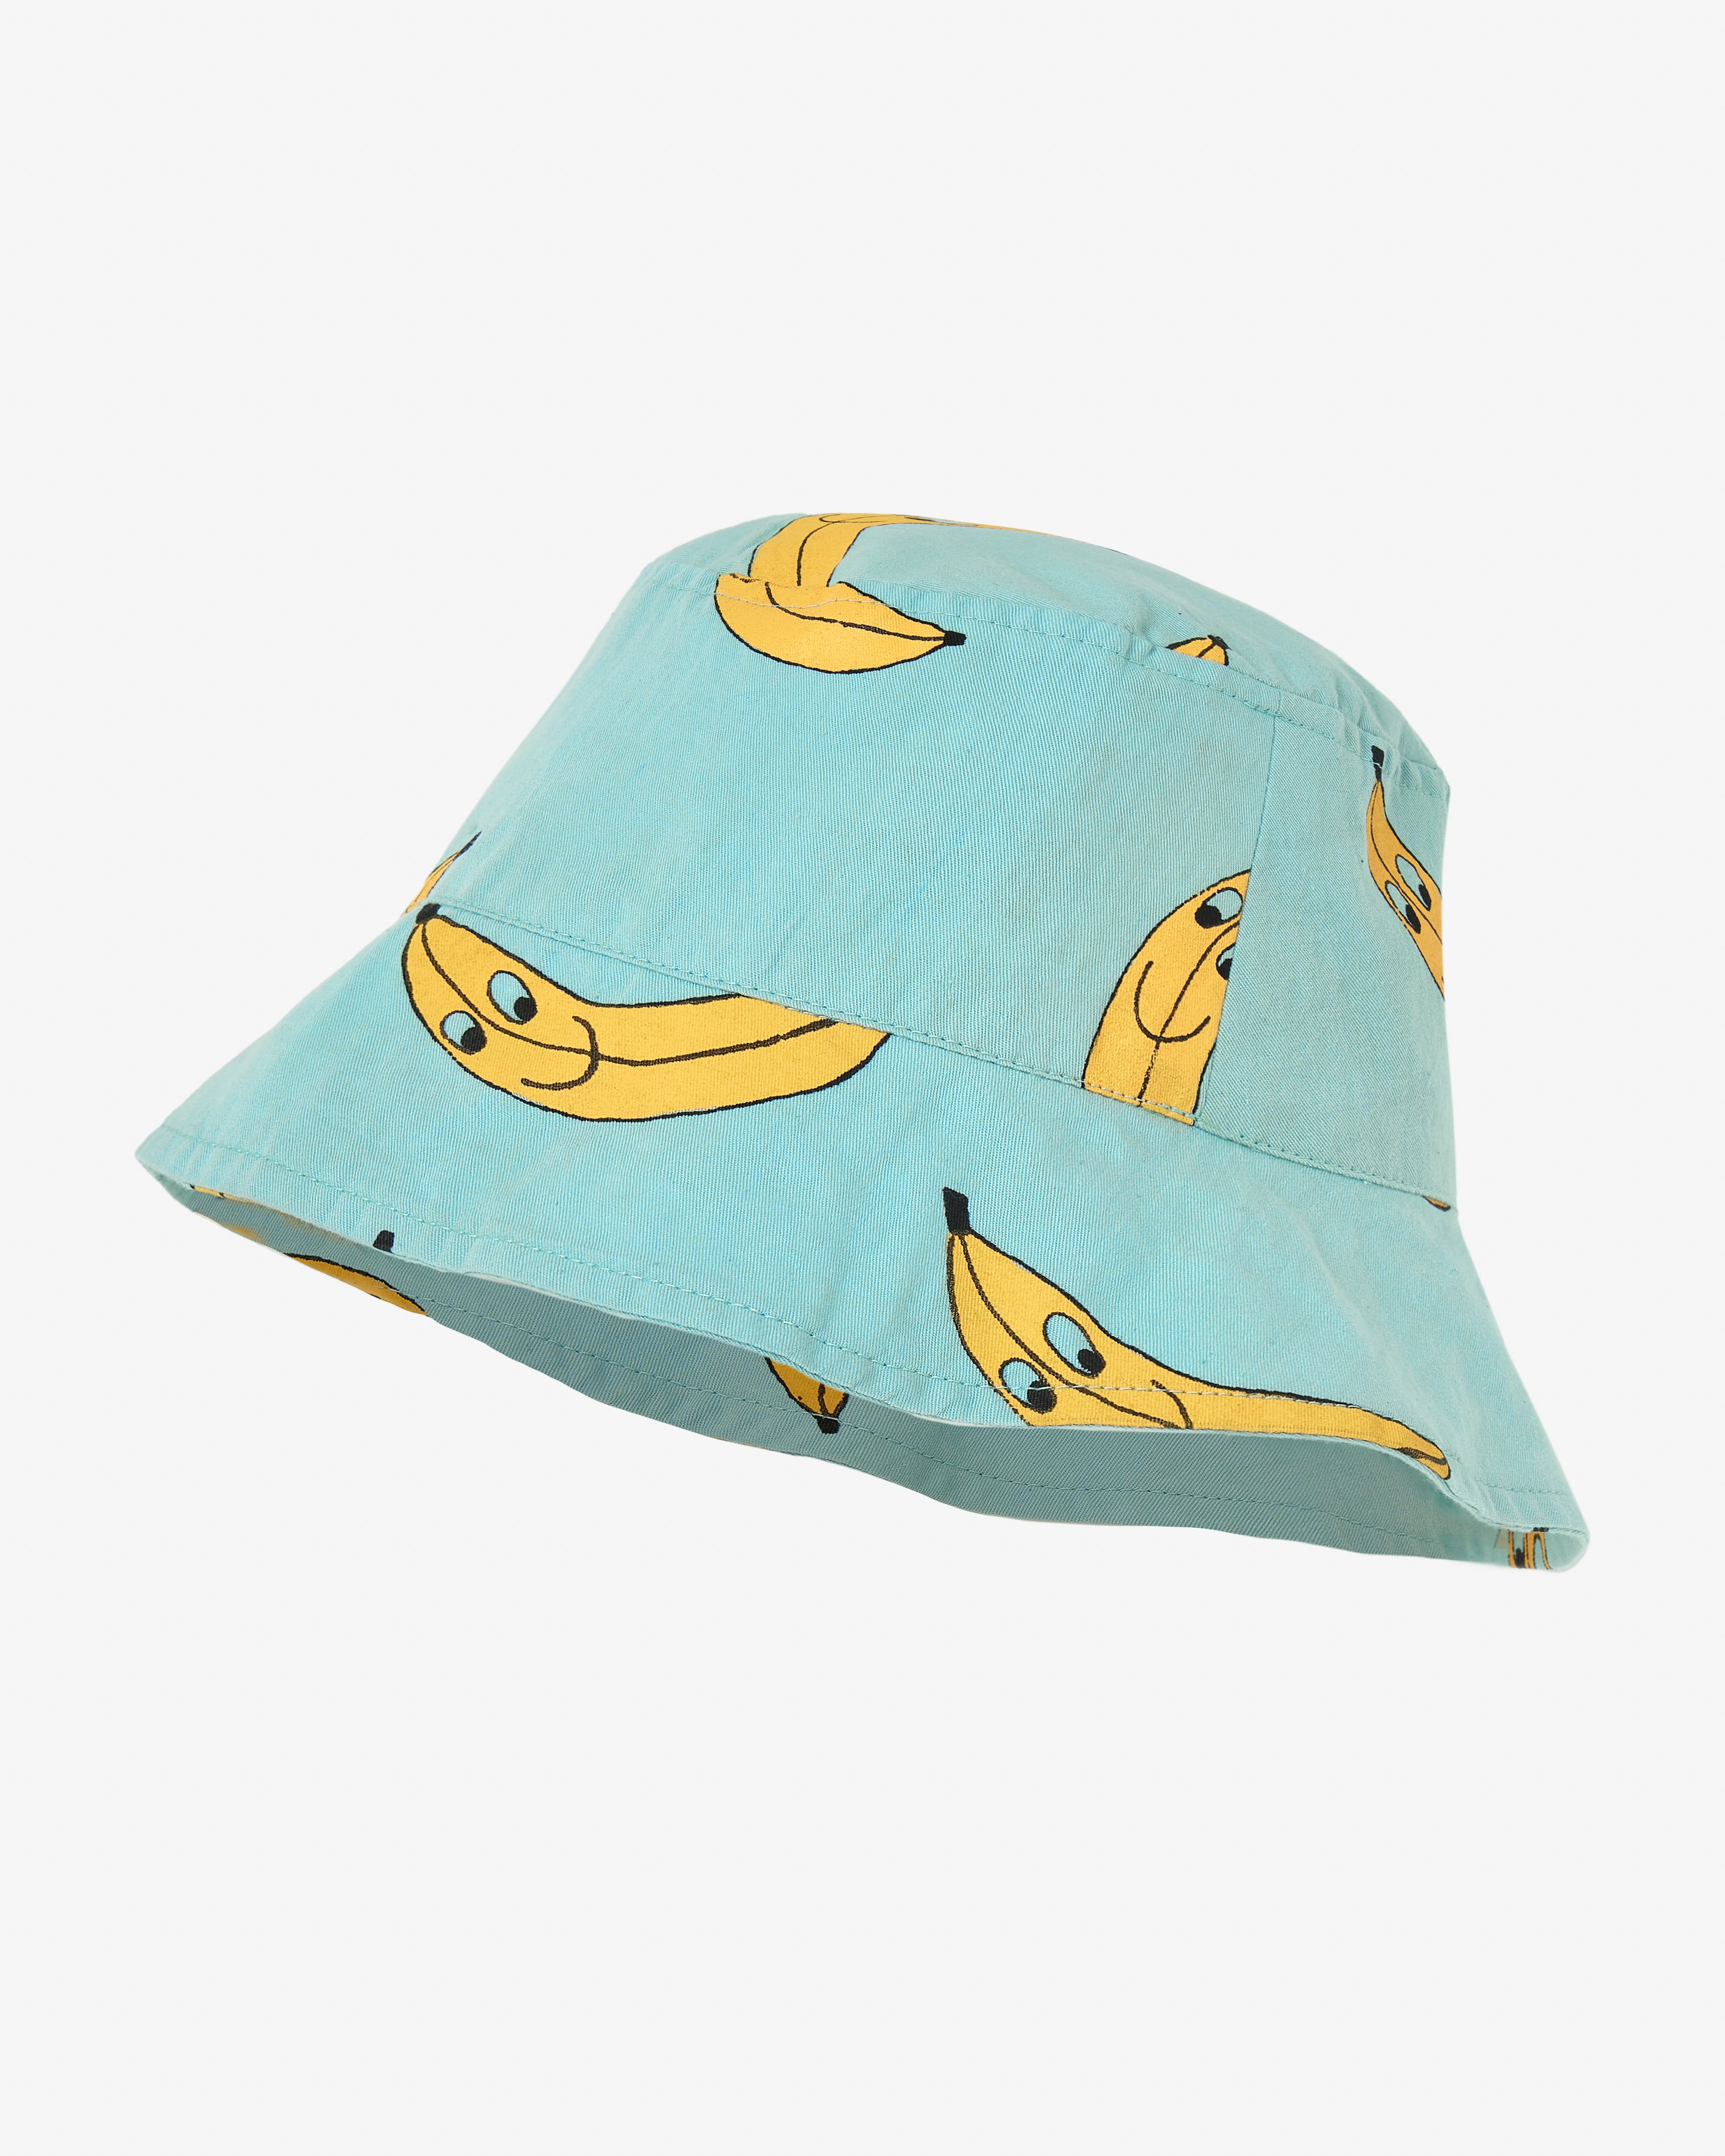 Bucket style hat in light green with yellow banana print. Made by Nadadelazos.